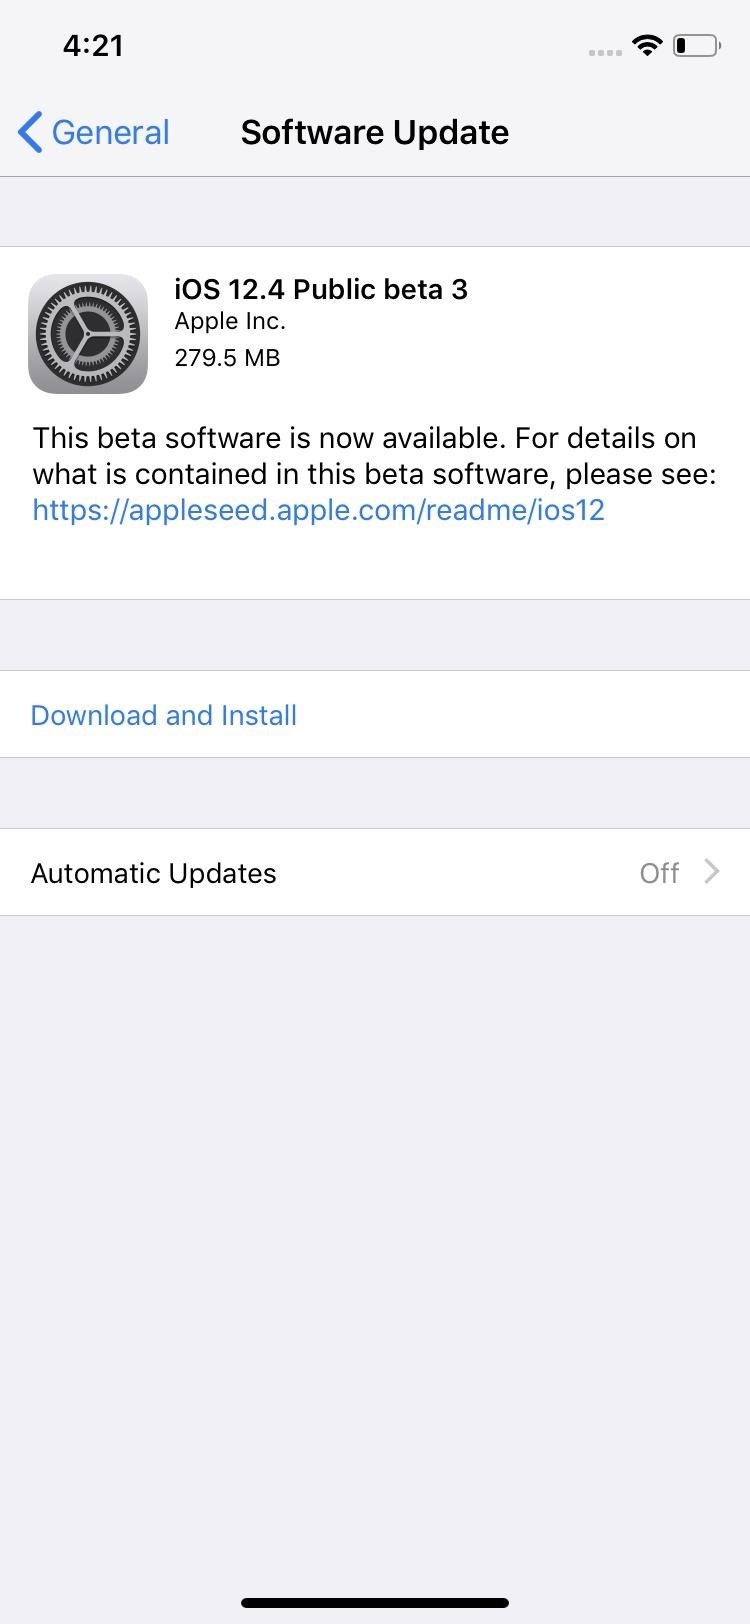 Apple Releases iOS 12.4 Public Beta 3 Today for Software Testers